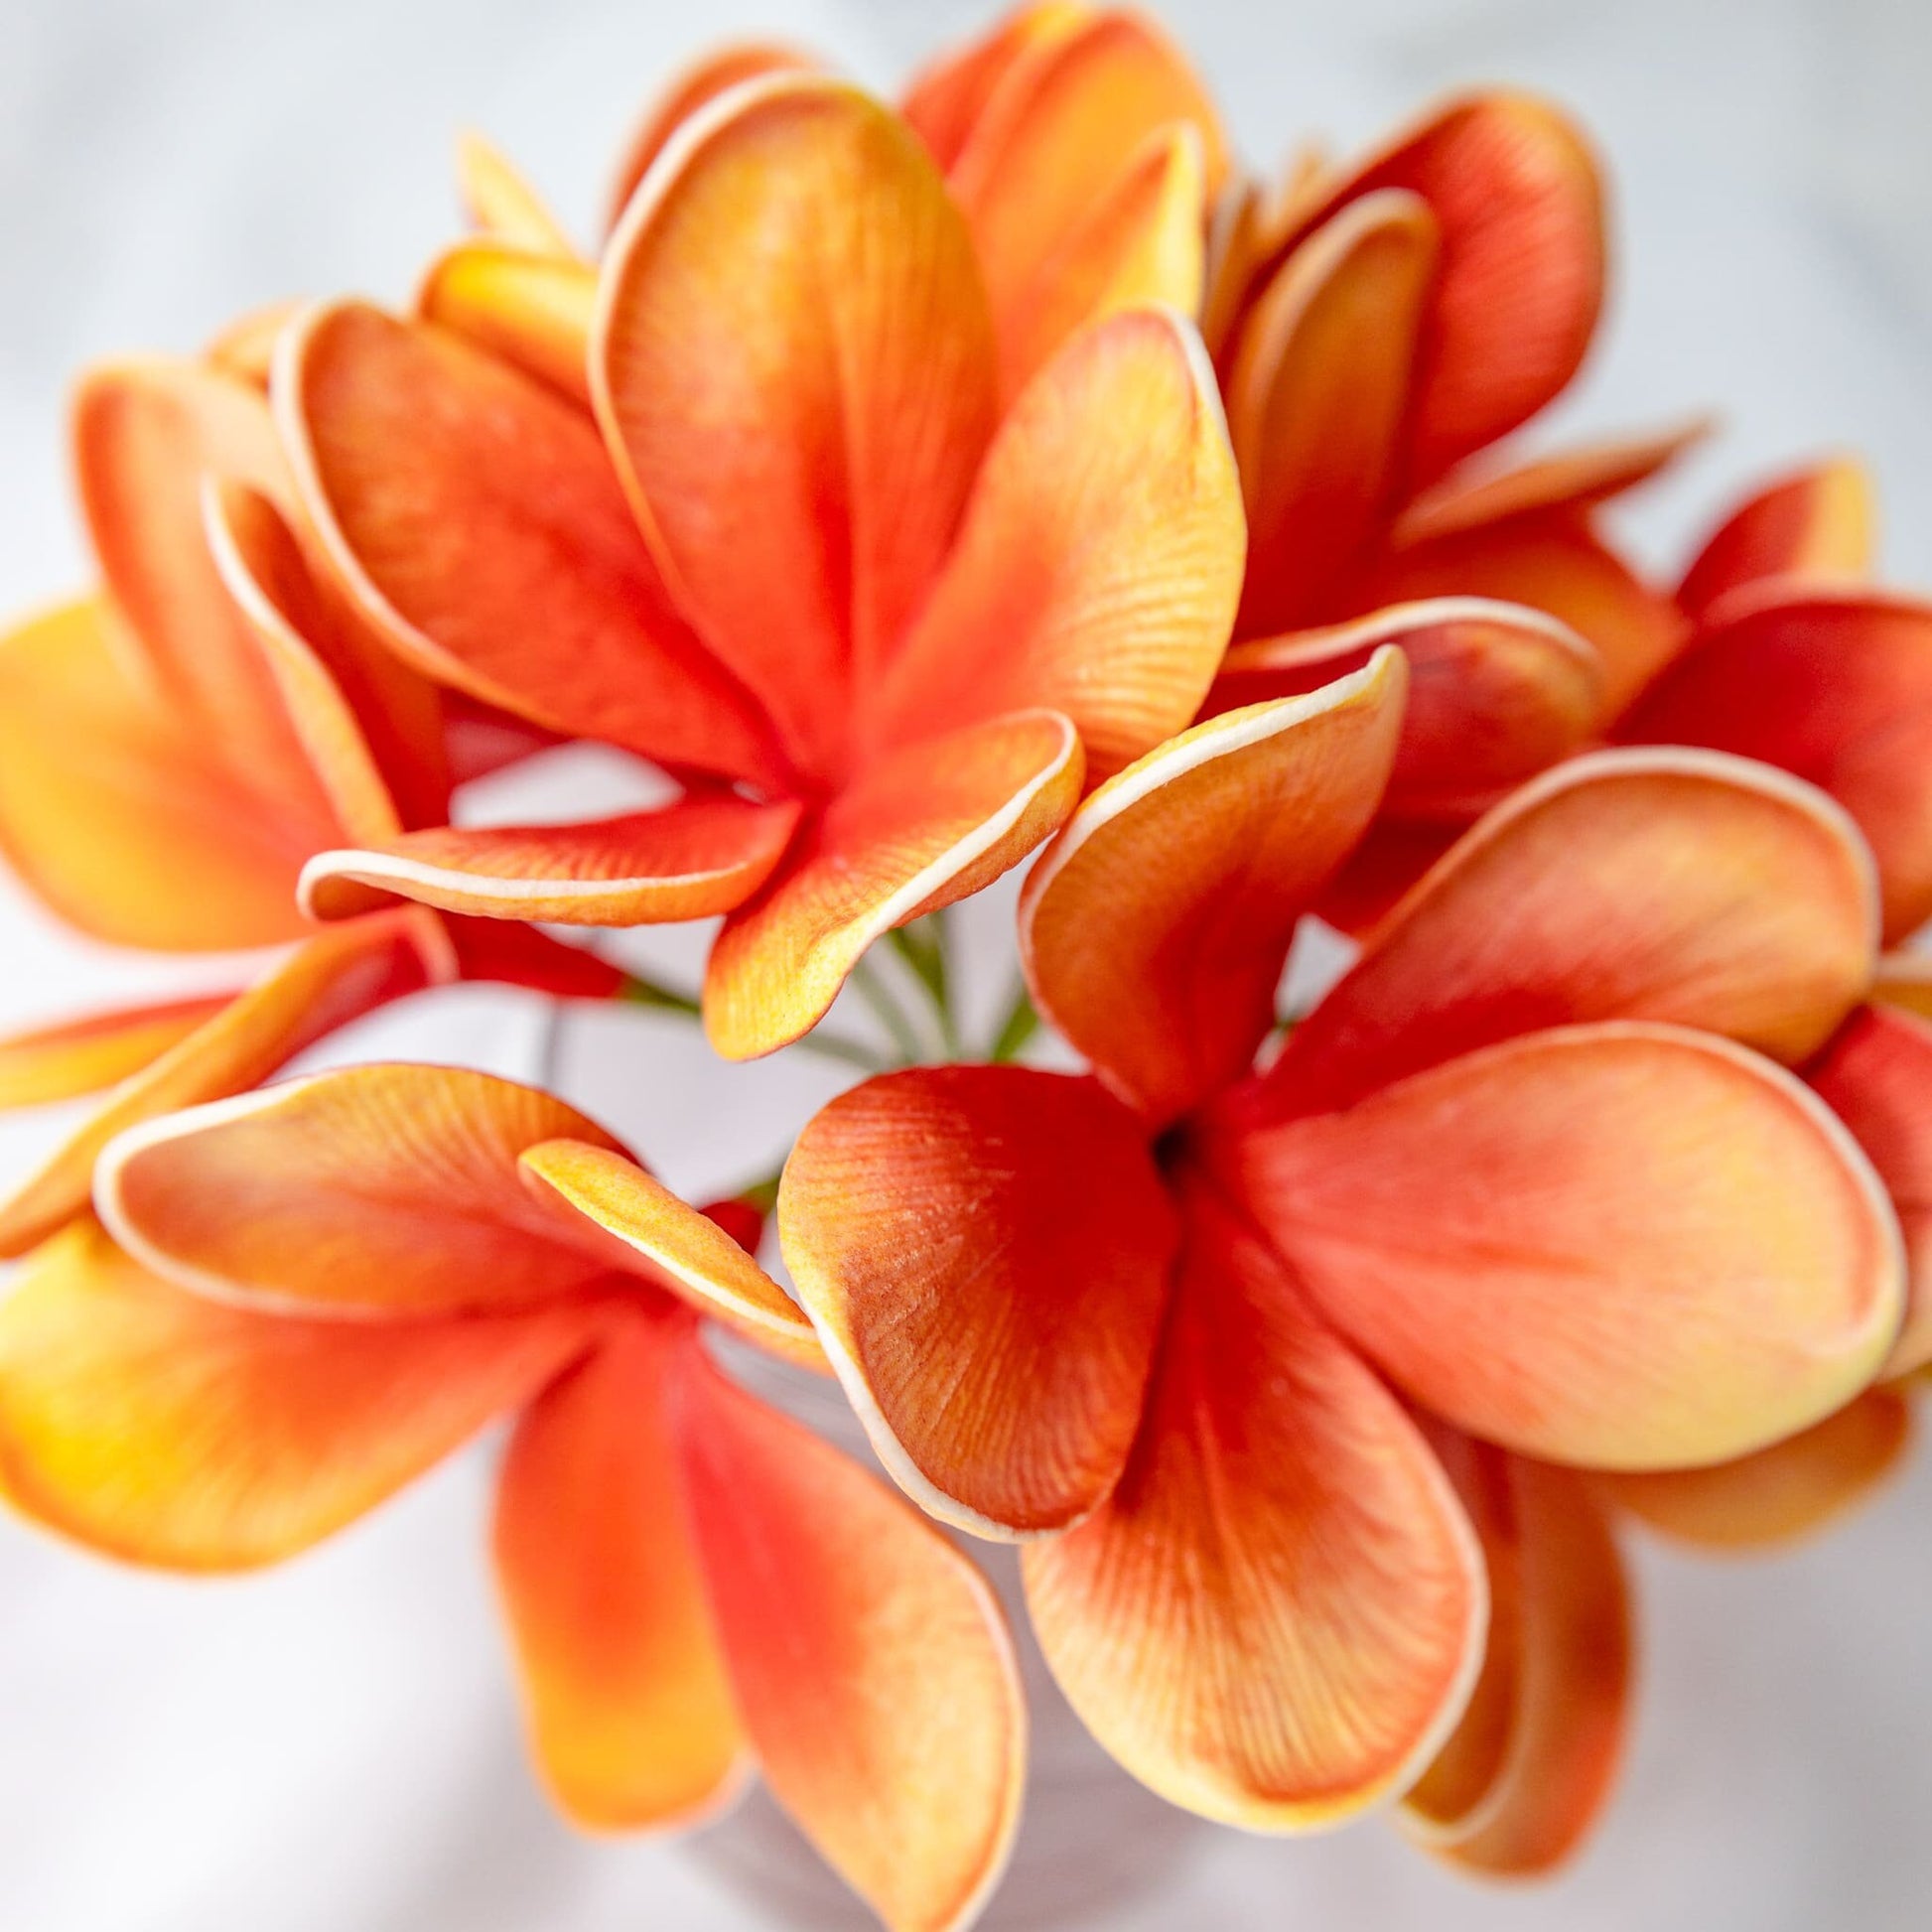 artificial tangerine frangipani flowers placed in transparent glass vase